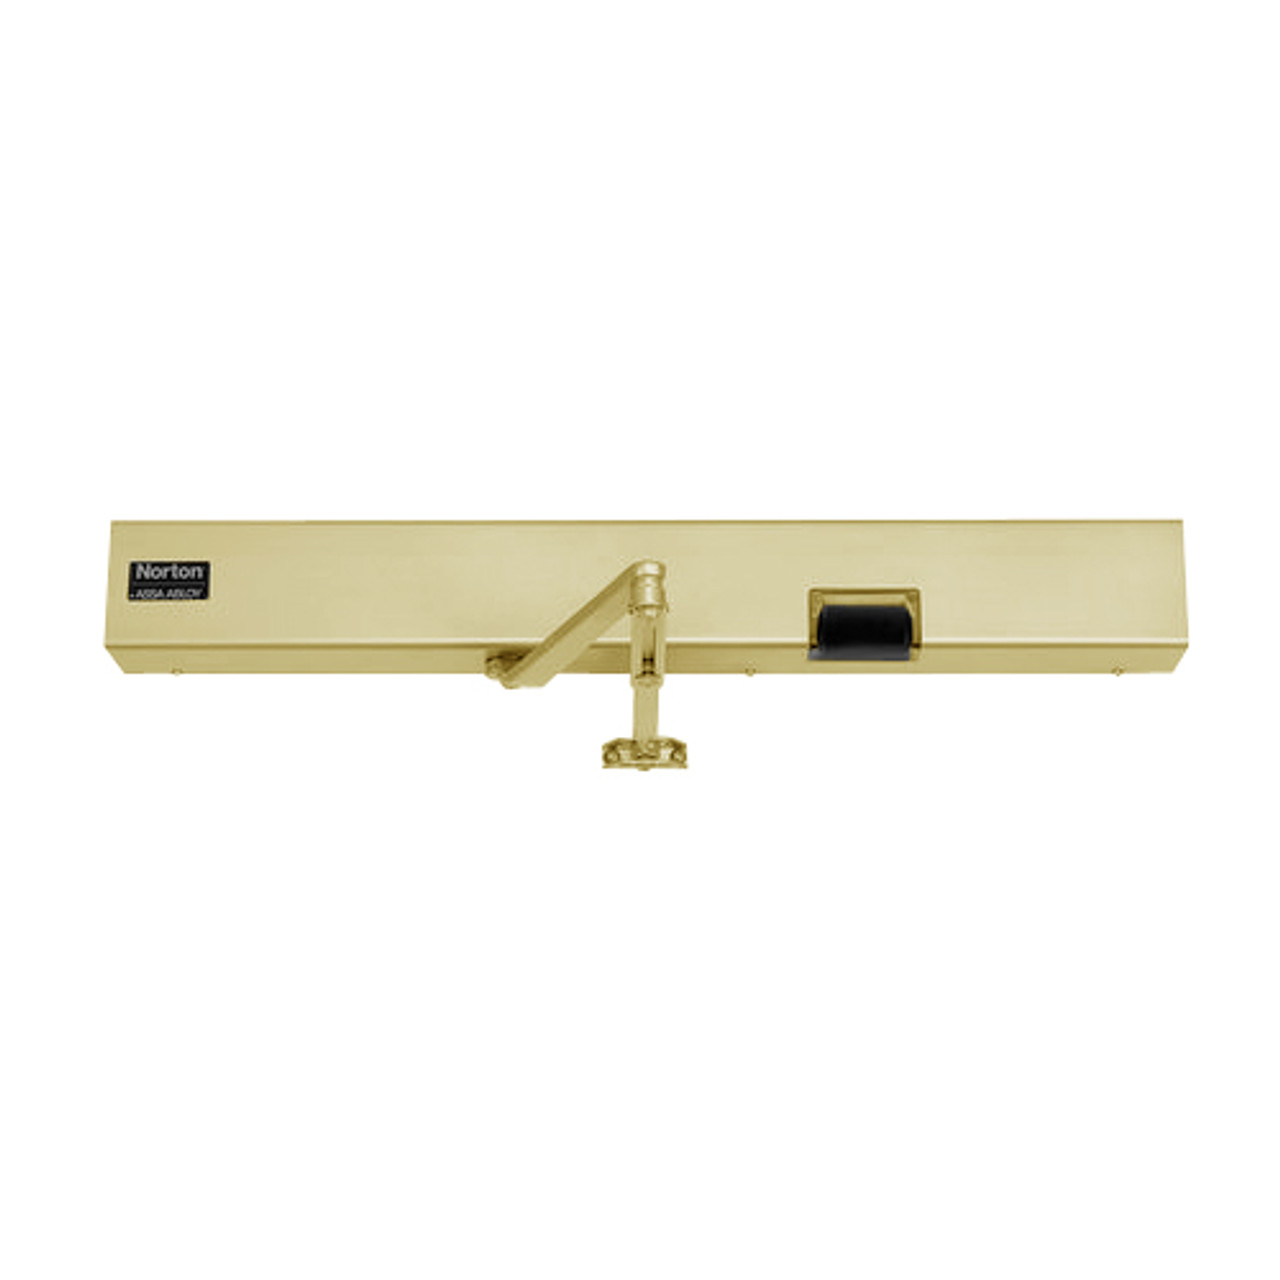 7122SZ-RH-120VAC-696 Norton 7100SZ Series Safe Zone Multi-Point Closer/Holder with Motion Sensor and Push Side Double Lever 11 inch Main Arm in Gold Finish